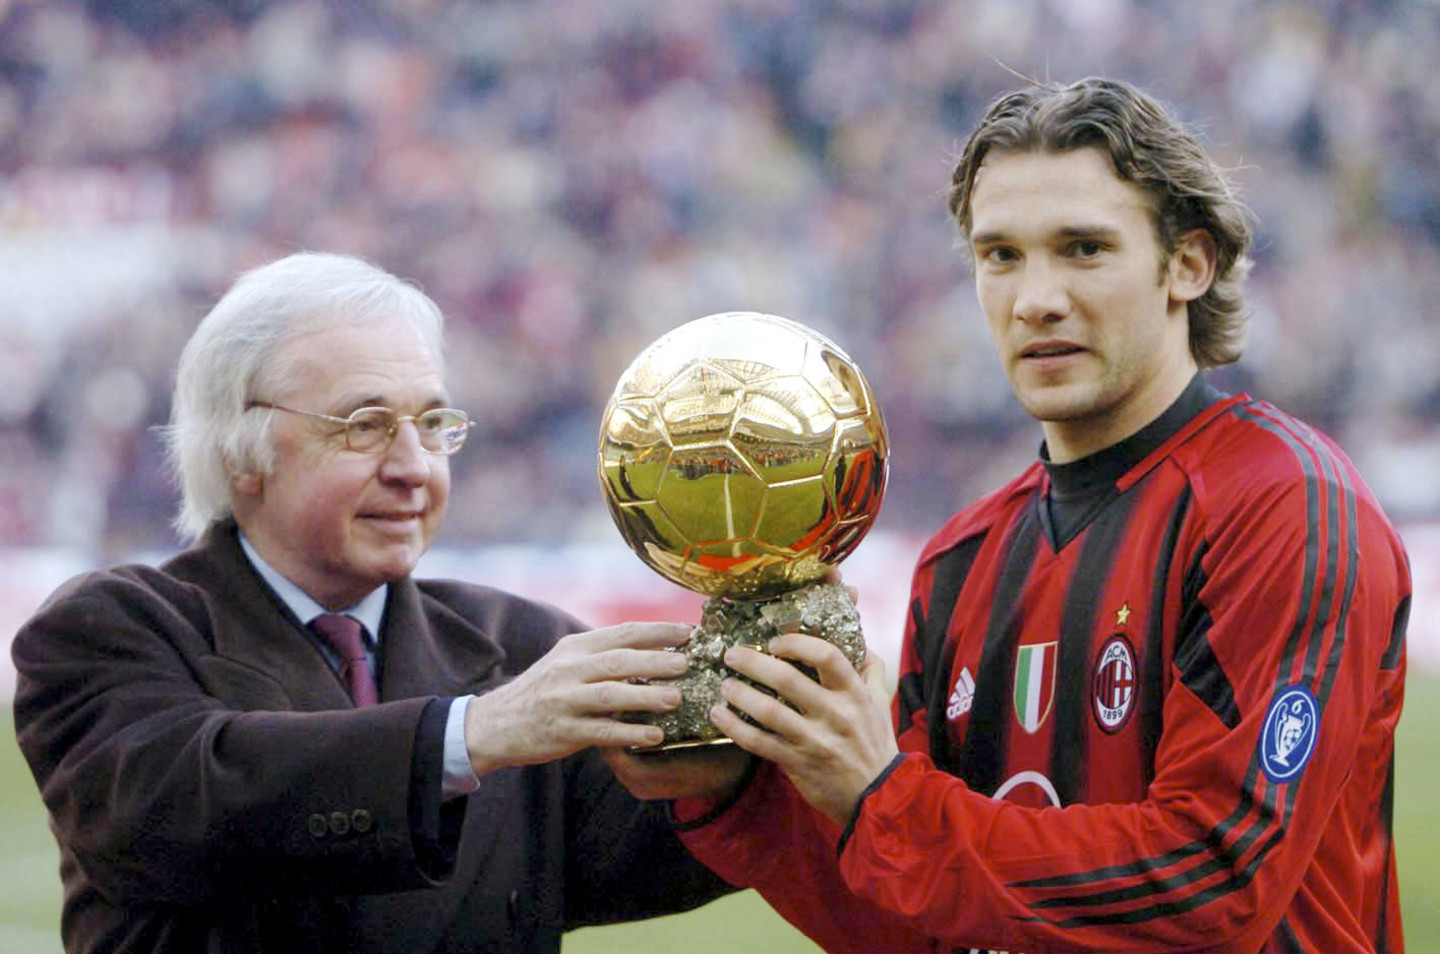 10 Ballon d'Or Winners if Only English Clubs Were Involved